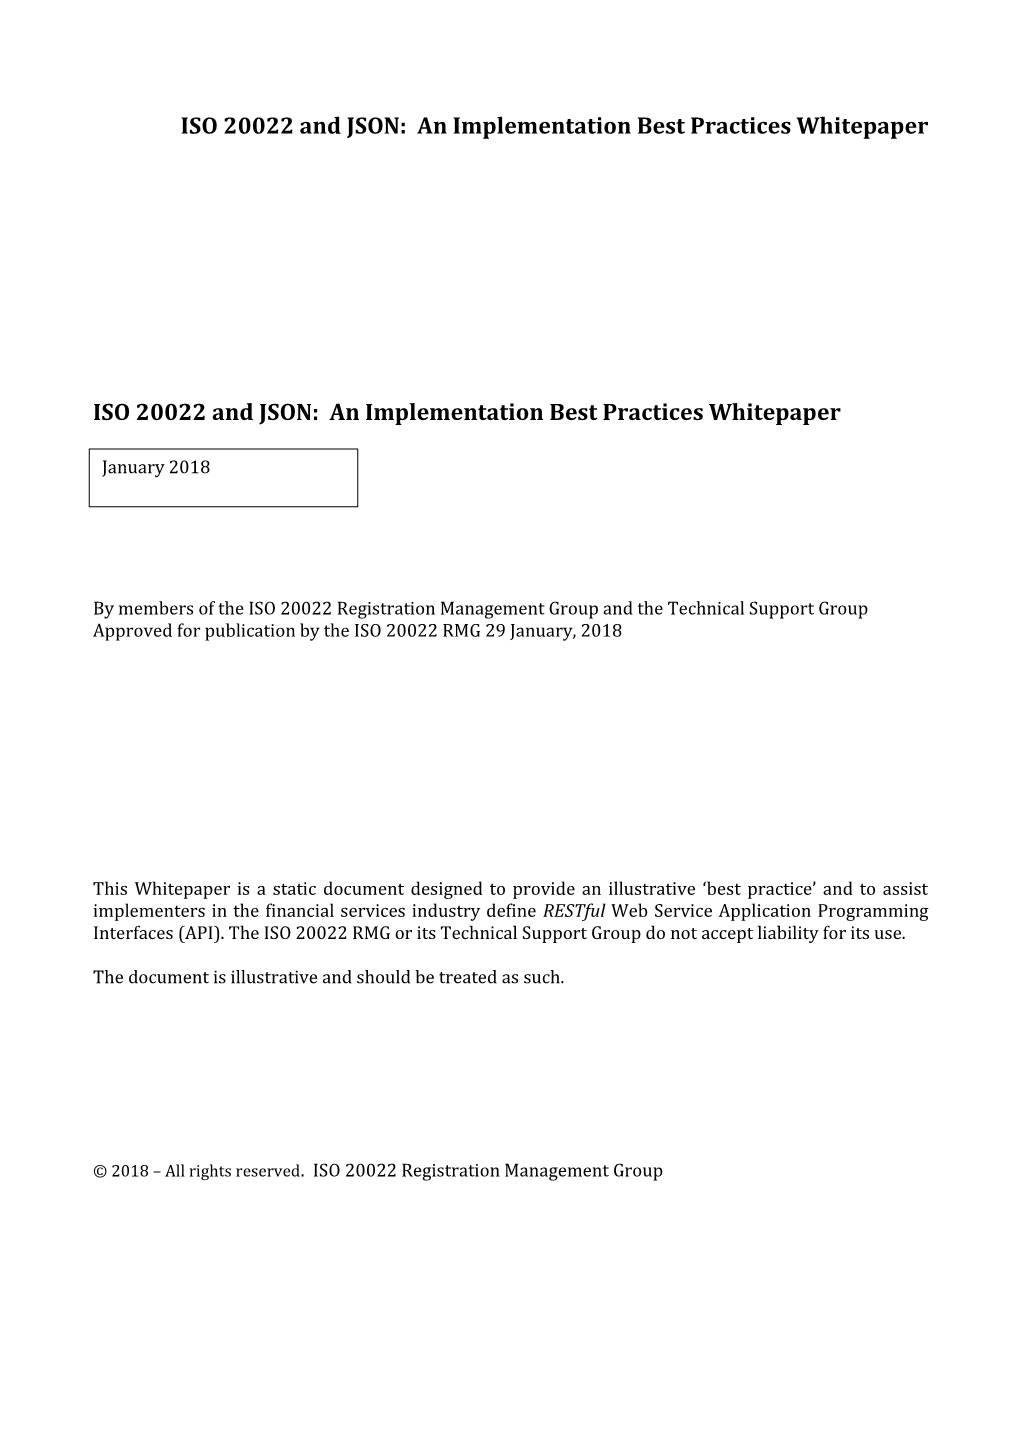 ISO 20022 and JSON: an Implementation Best Practices Whitepaper